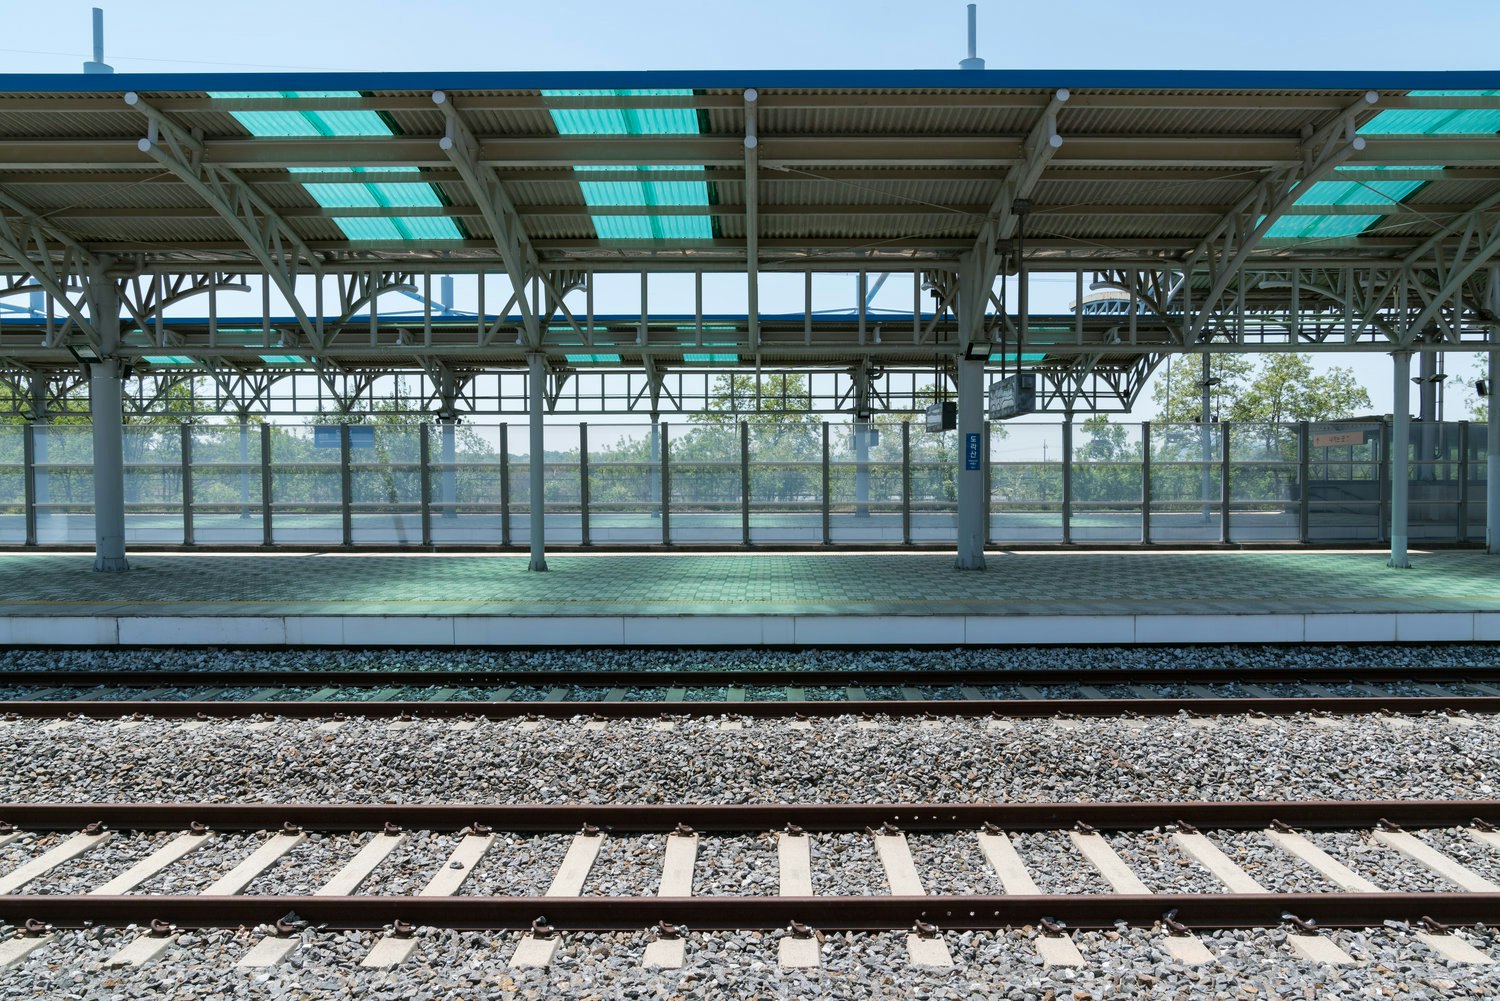 An empty platform at the abandoned Dorasan Station, in Korea. Glass paneling separates the platform from woodland outside, while a track is visible in front.